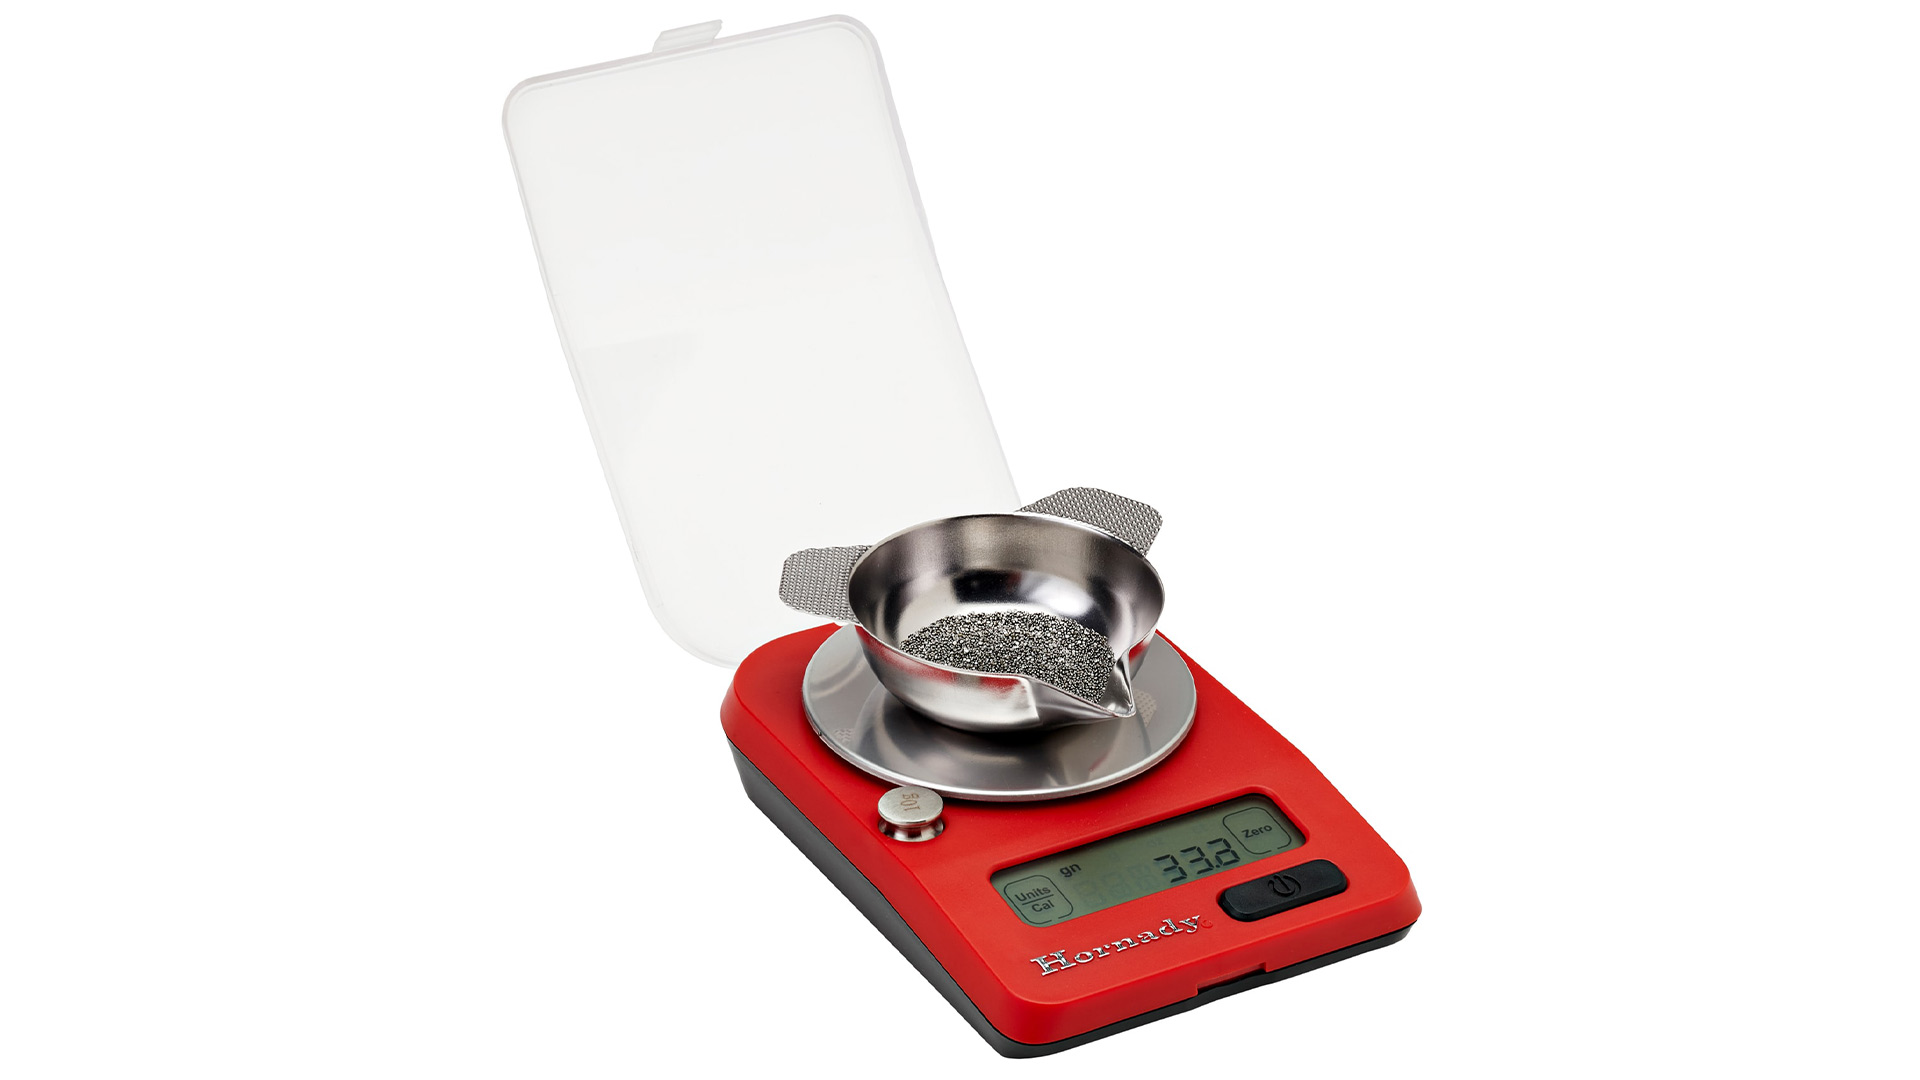 Hornady G3-1500 electronic scale